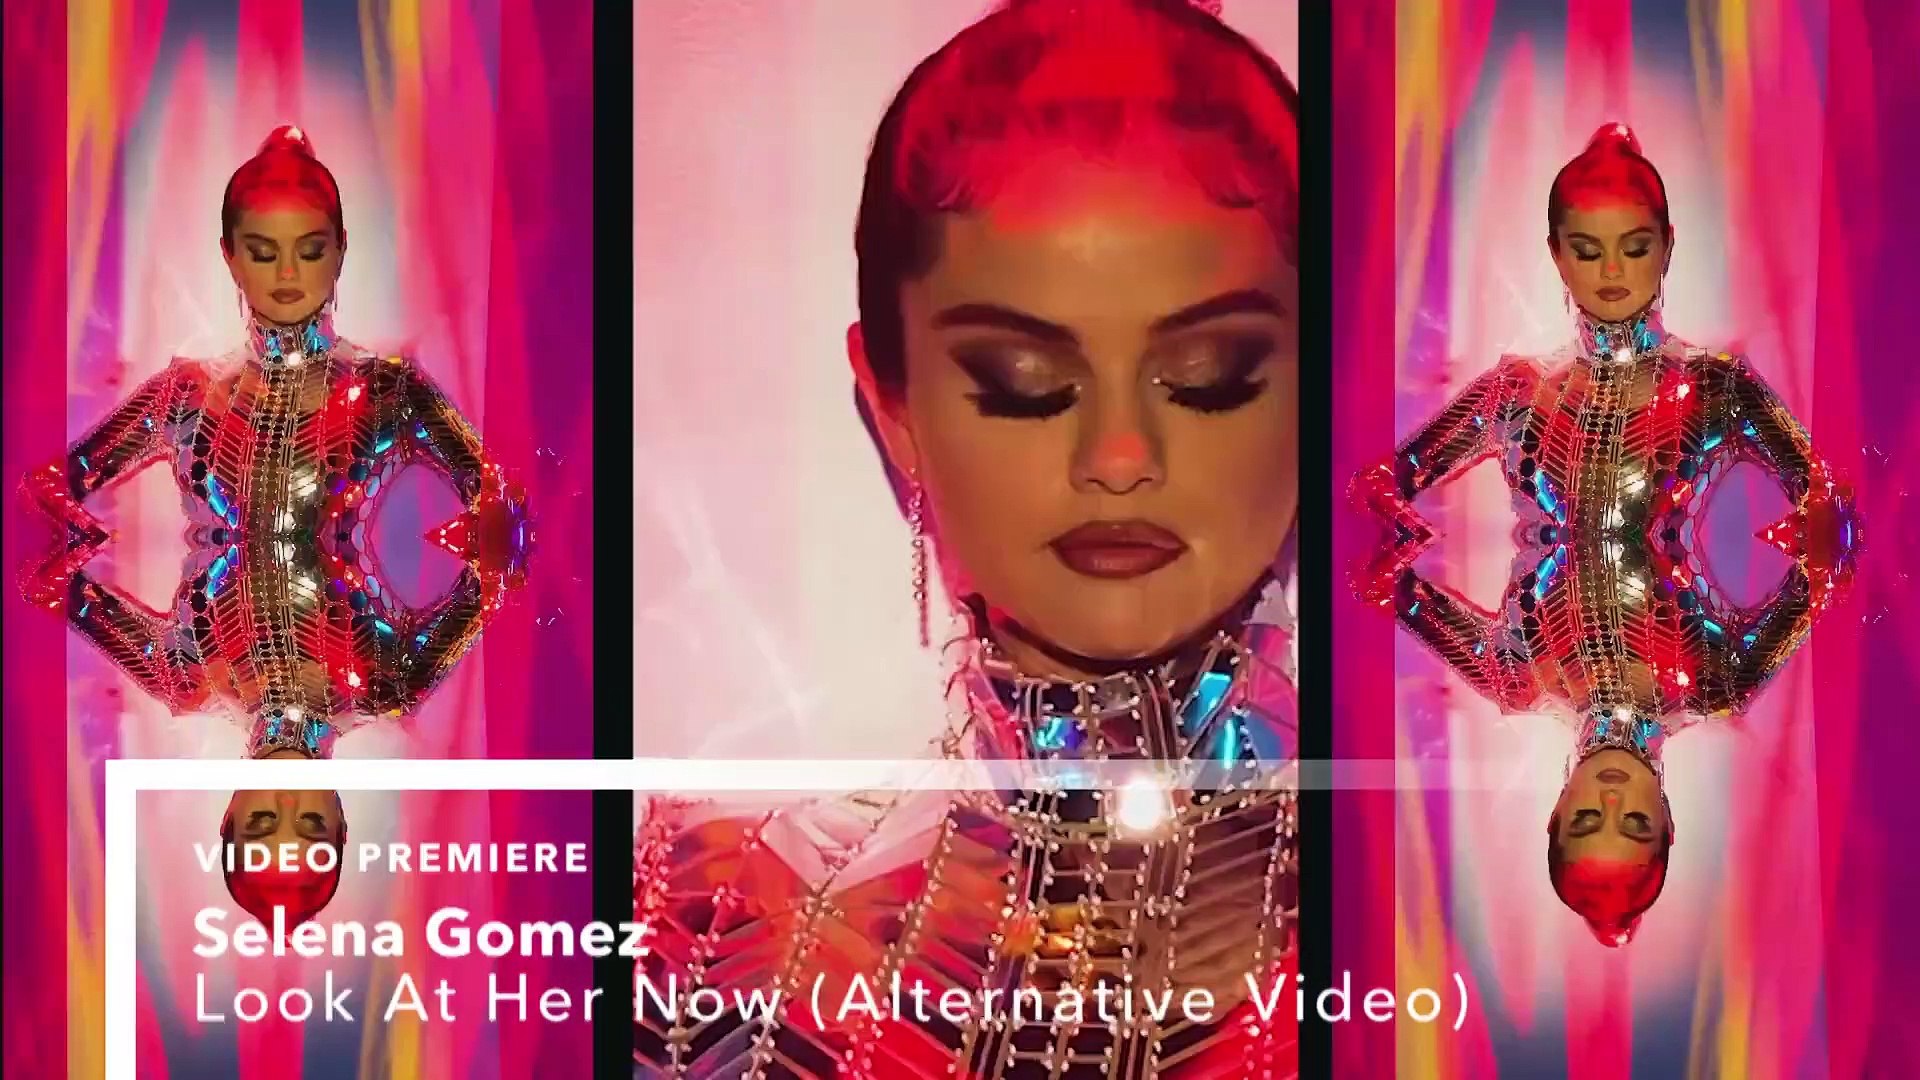 Vevo - Hot This Week January 17, 2020 (The Biggest New Music Videos)